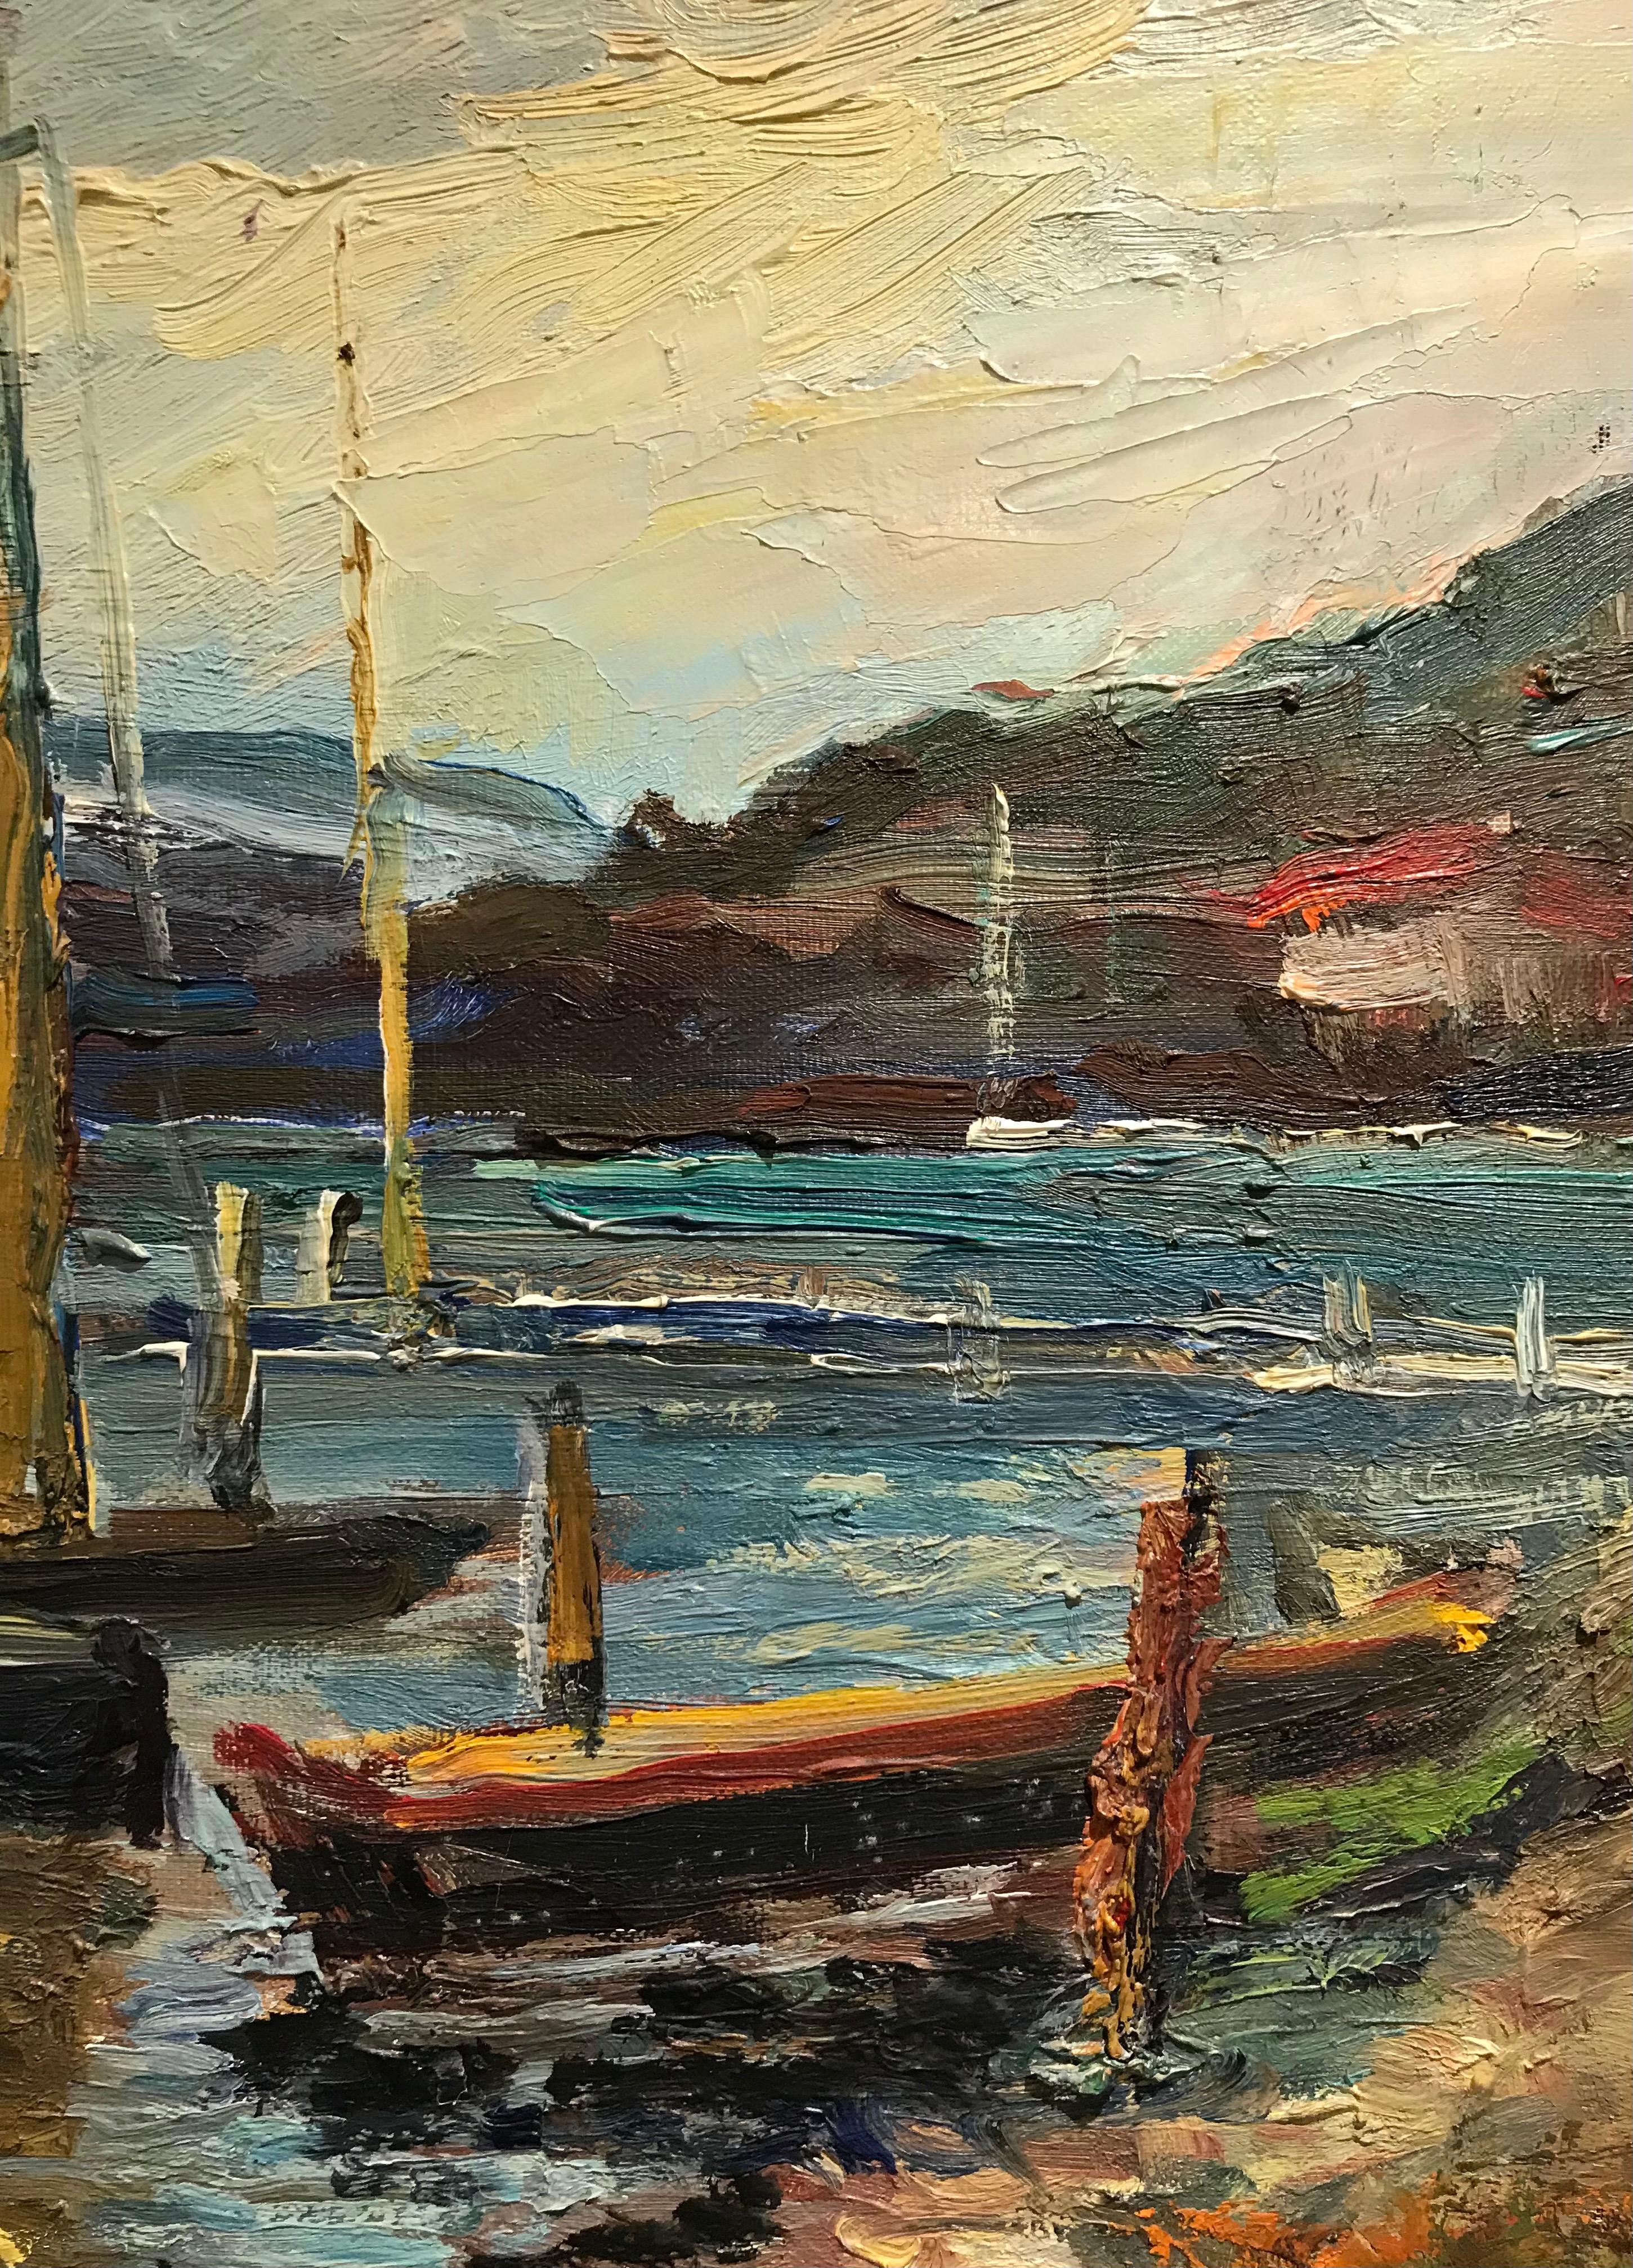 Sailboats by the lake - Expressionist Painting by Harry Urban